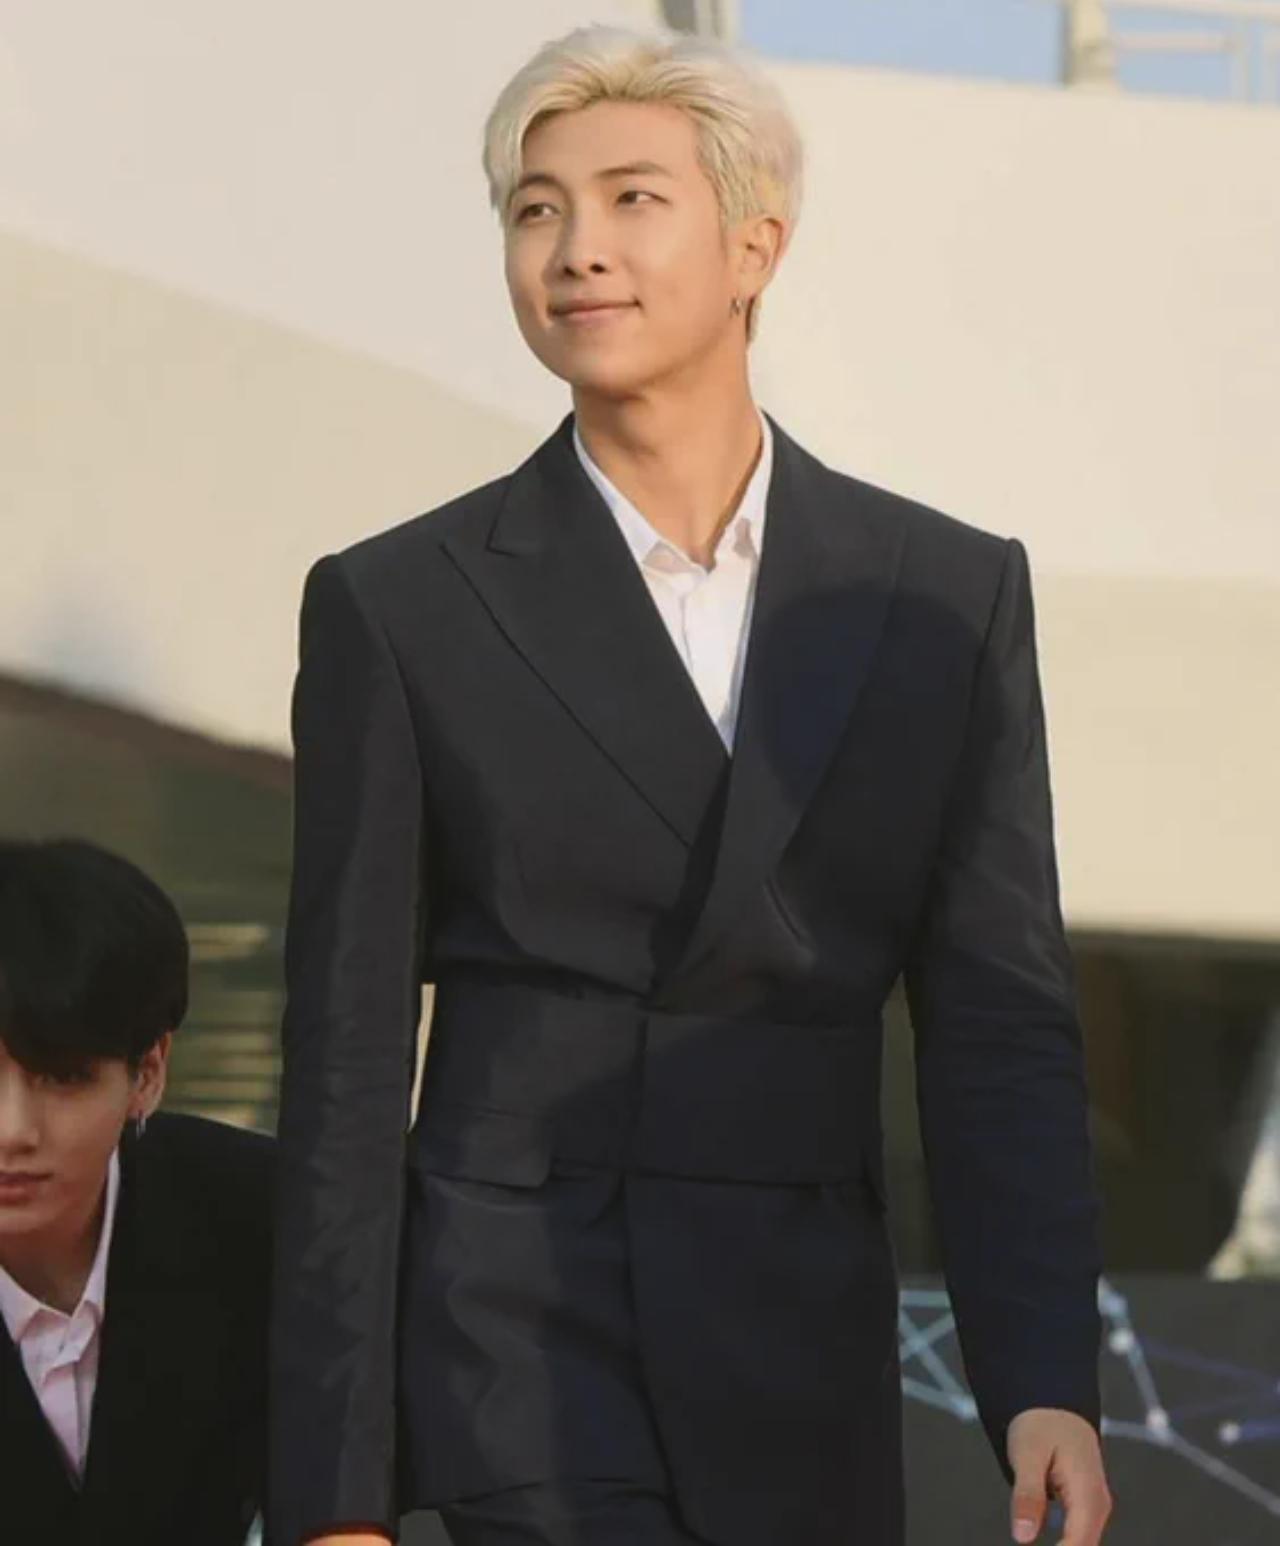 Once again, we can't take our eyes off him! Namjoon looks debonair in his uniquely cut black suit